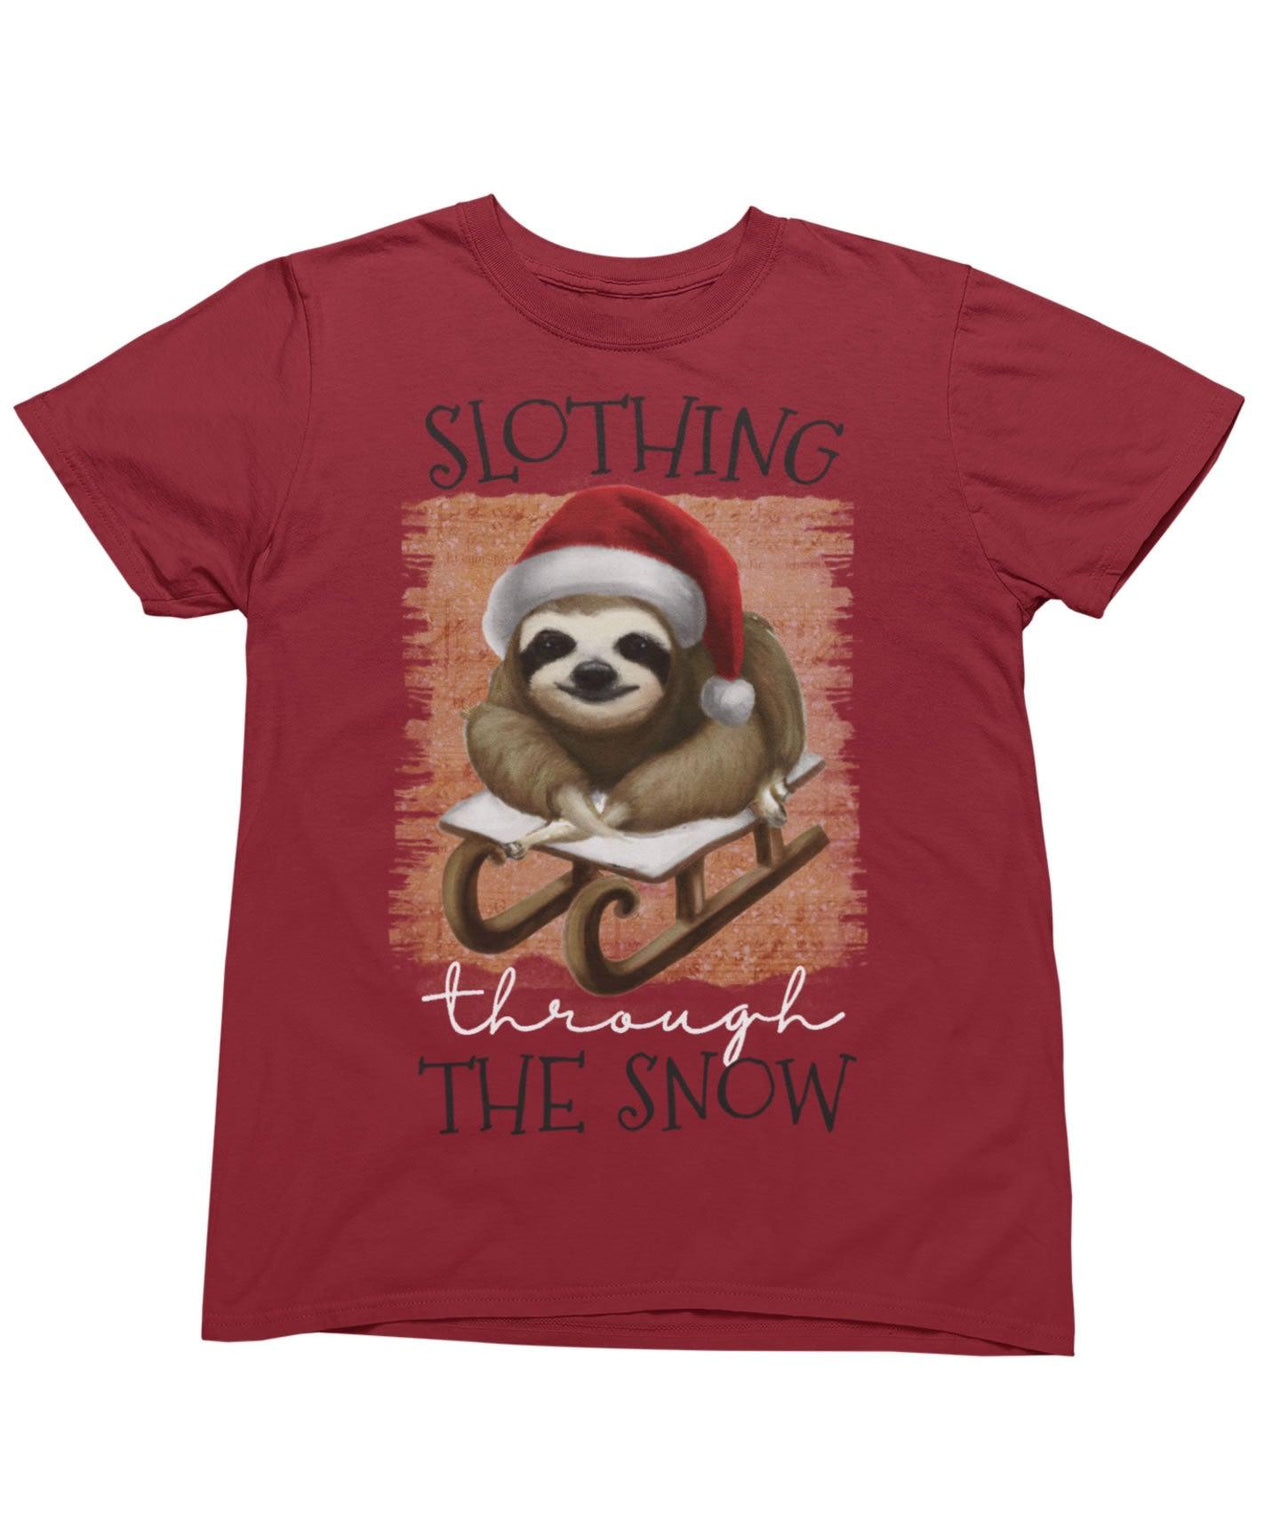 Slothing Through The Snow Christmas Unisex Graphic T-Shirt For Men 8Ball